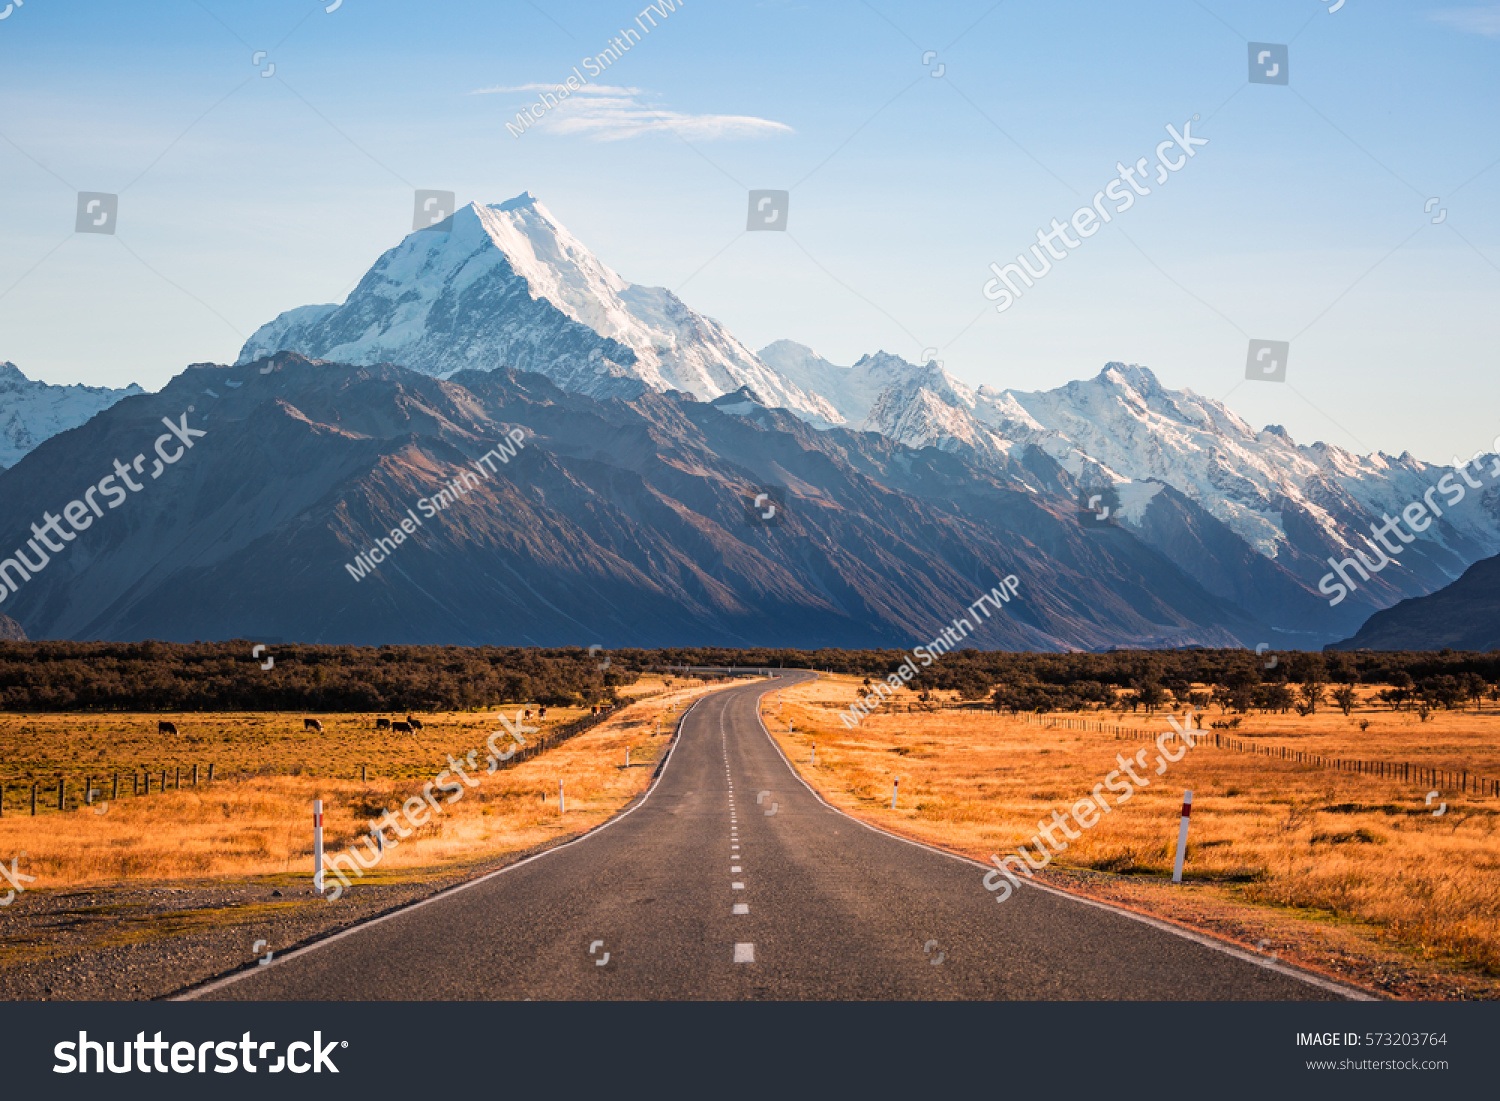 A long road leading to a large snow capped mountain on a sunny day #573203764